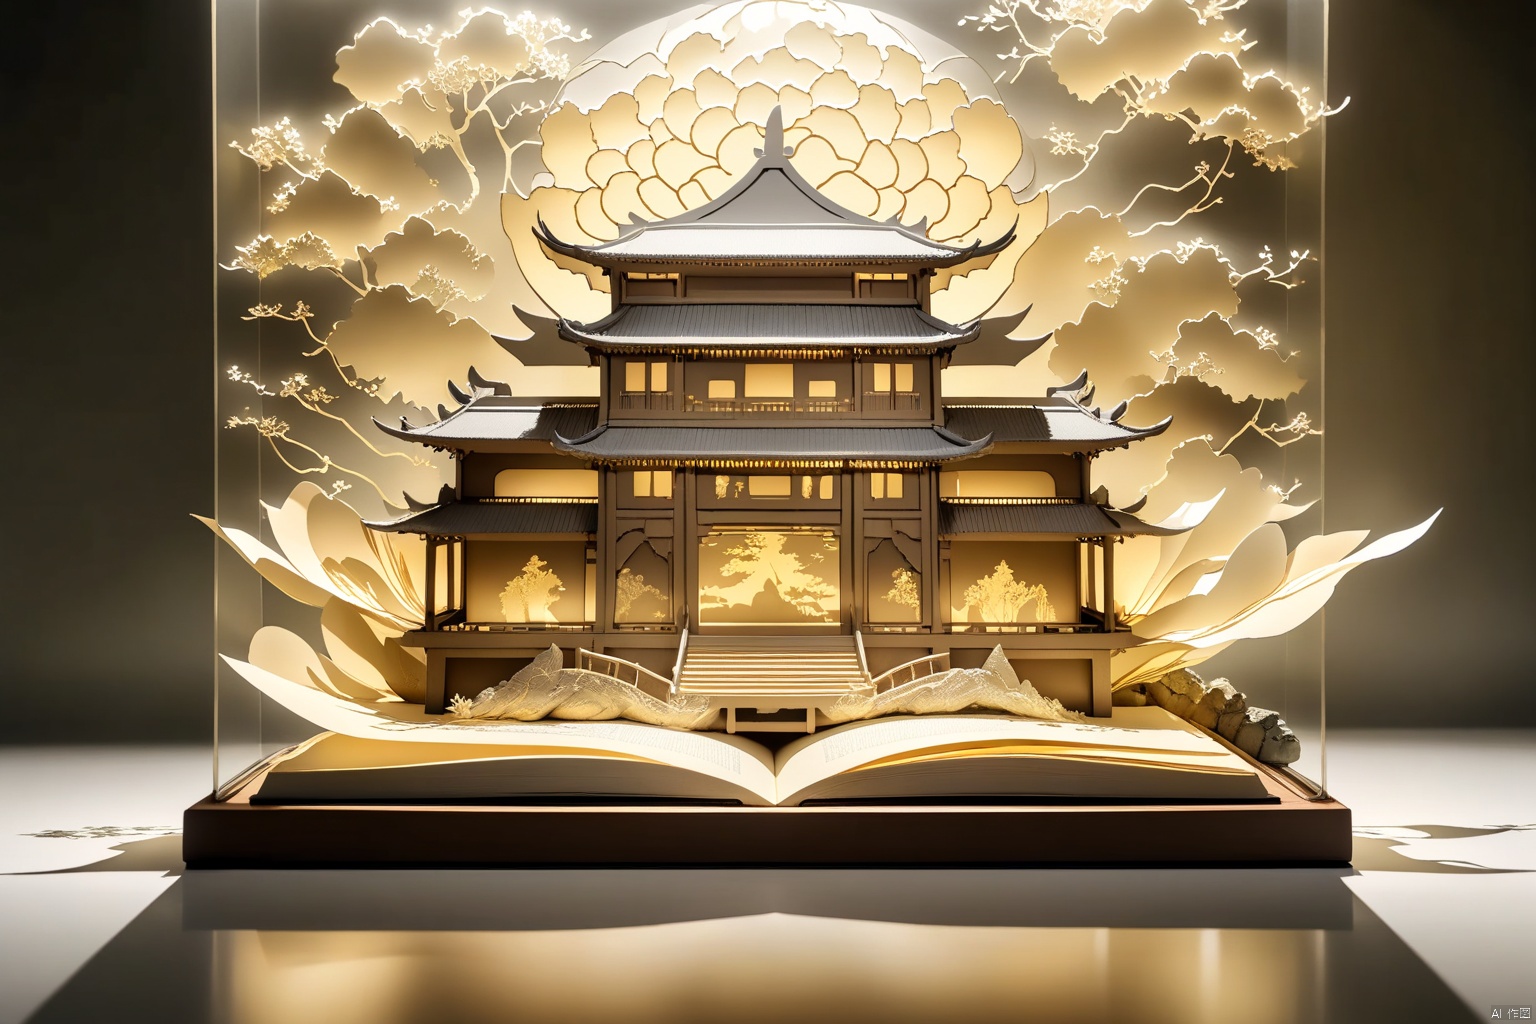 translucent embroidery, top light, backlight, A lighted book, seated front, detailed art style, paper sculpture, geographic photo, hi-res image, paper cut book design oriental palace, tilt photography style, 8k resolution, night scene, photo taken with a Nikon D750 with lights on top, cityscape style, intricate woodwork, grandiose gauges, chinese book model, golden light style, pencil art illustration, hi-res image, site-specific artwork, i can't believe how beautiful this is,
Negative reminder, flowing gold art, silk transparent material style, abstract design, ethereal phantom, lifelike, black and white tones,